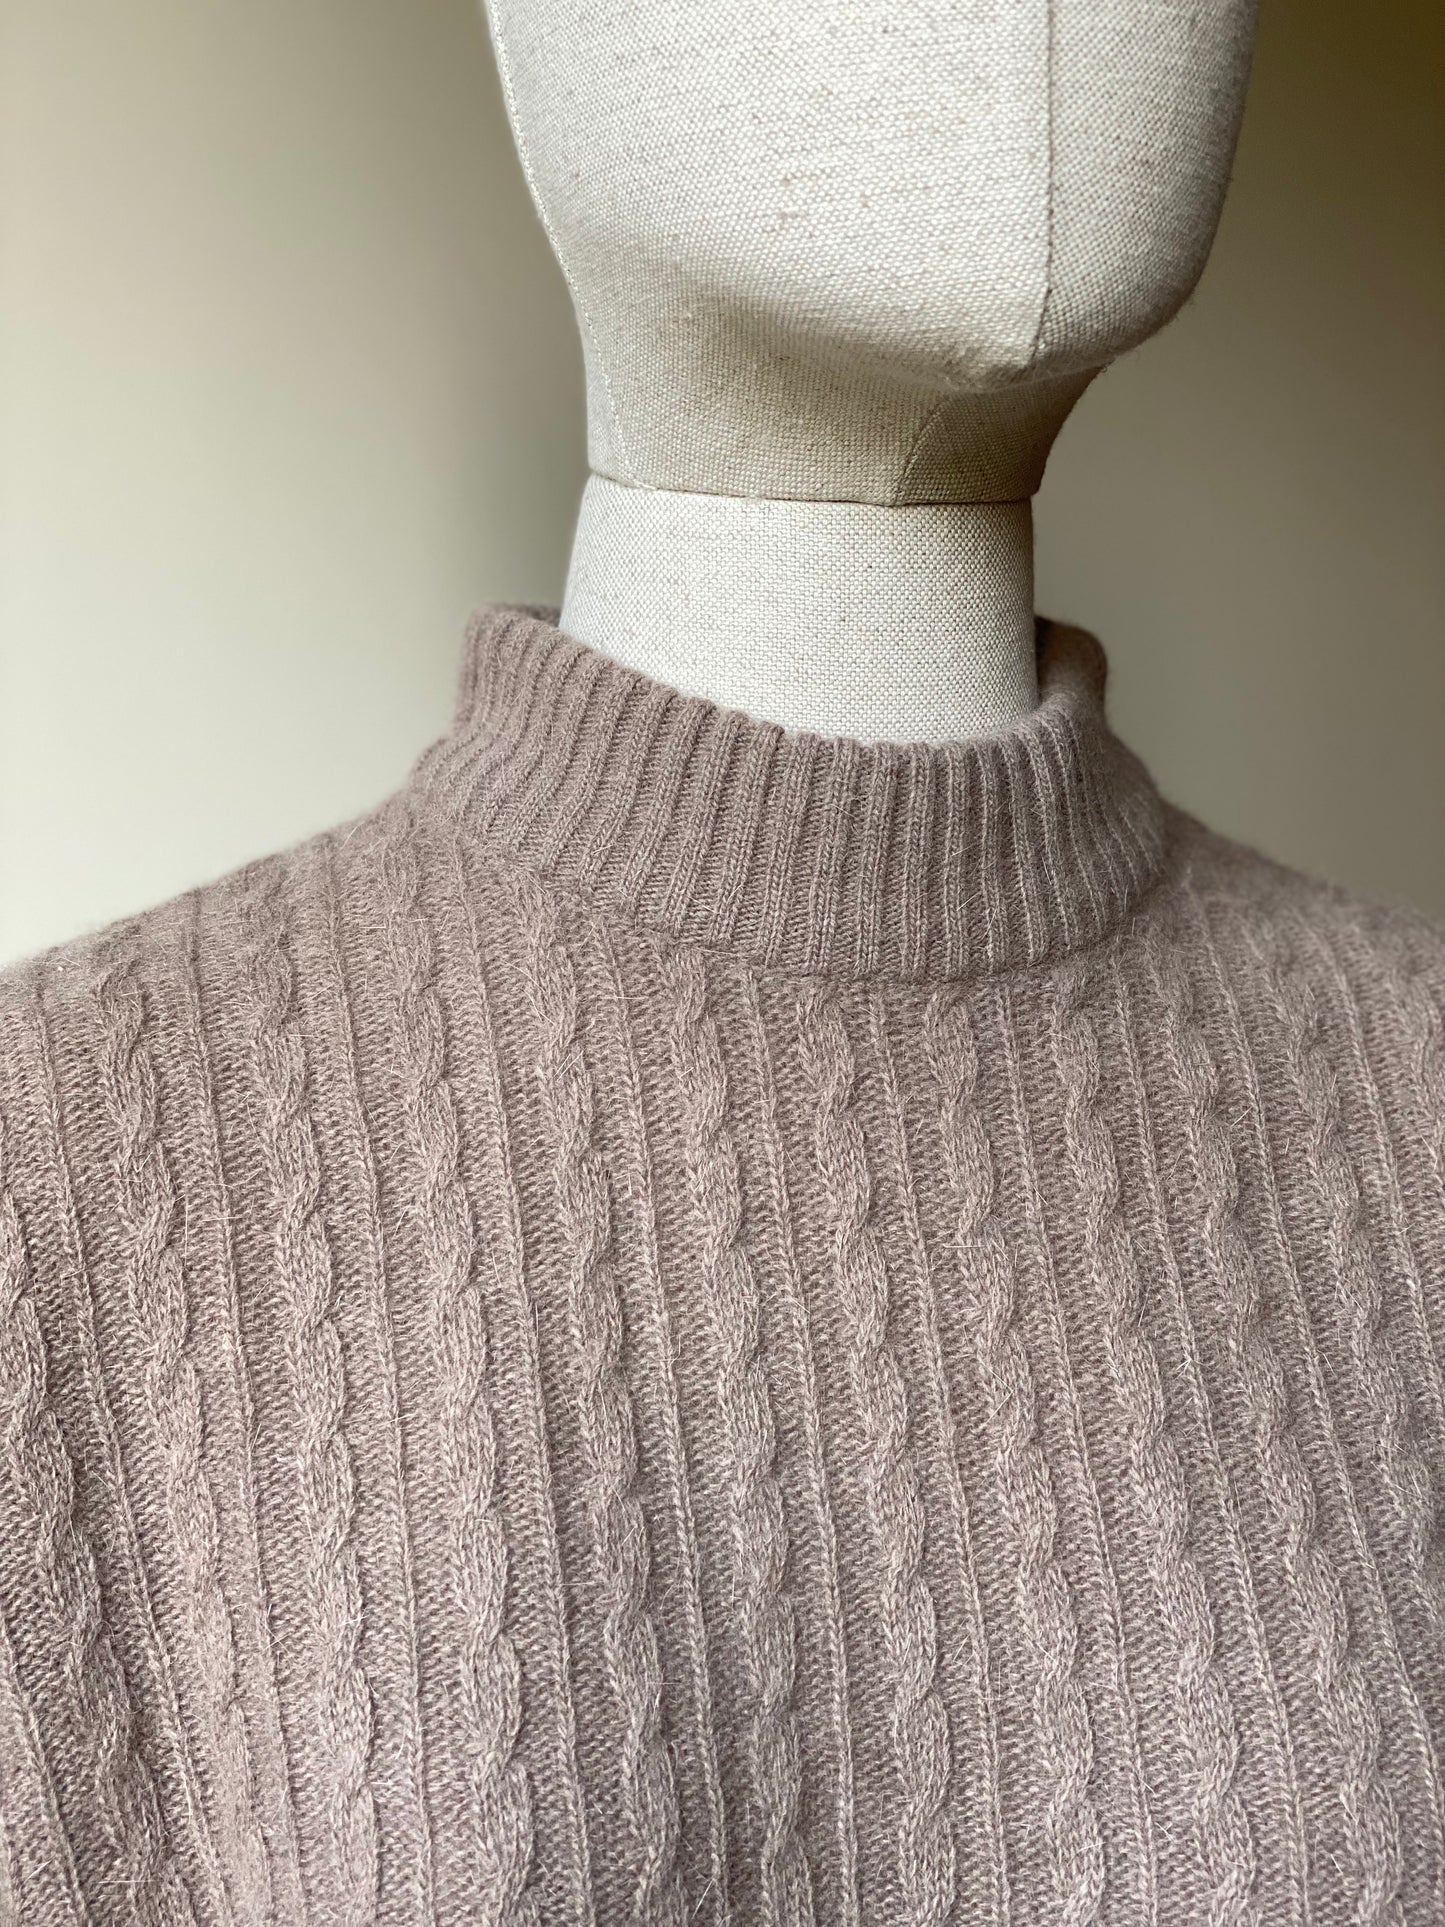 Vintage Wool and Angora Brown Sweater